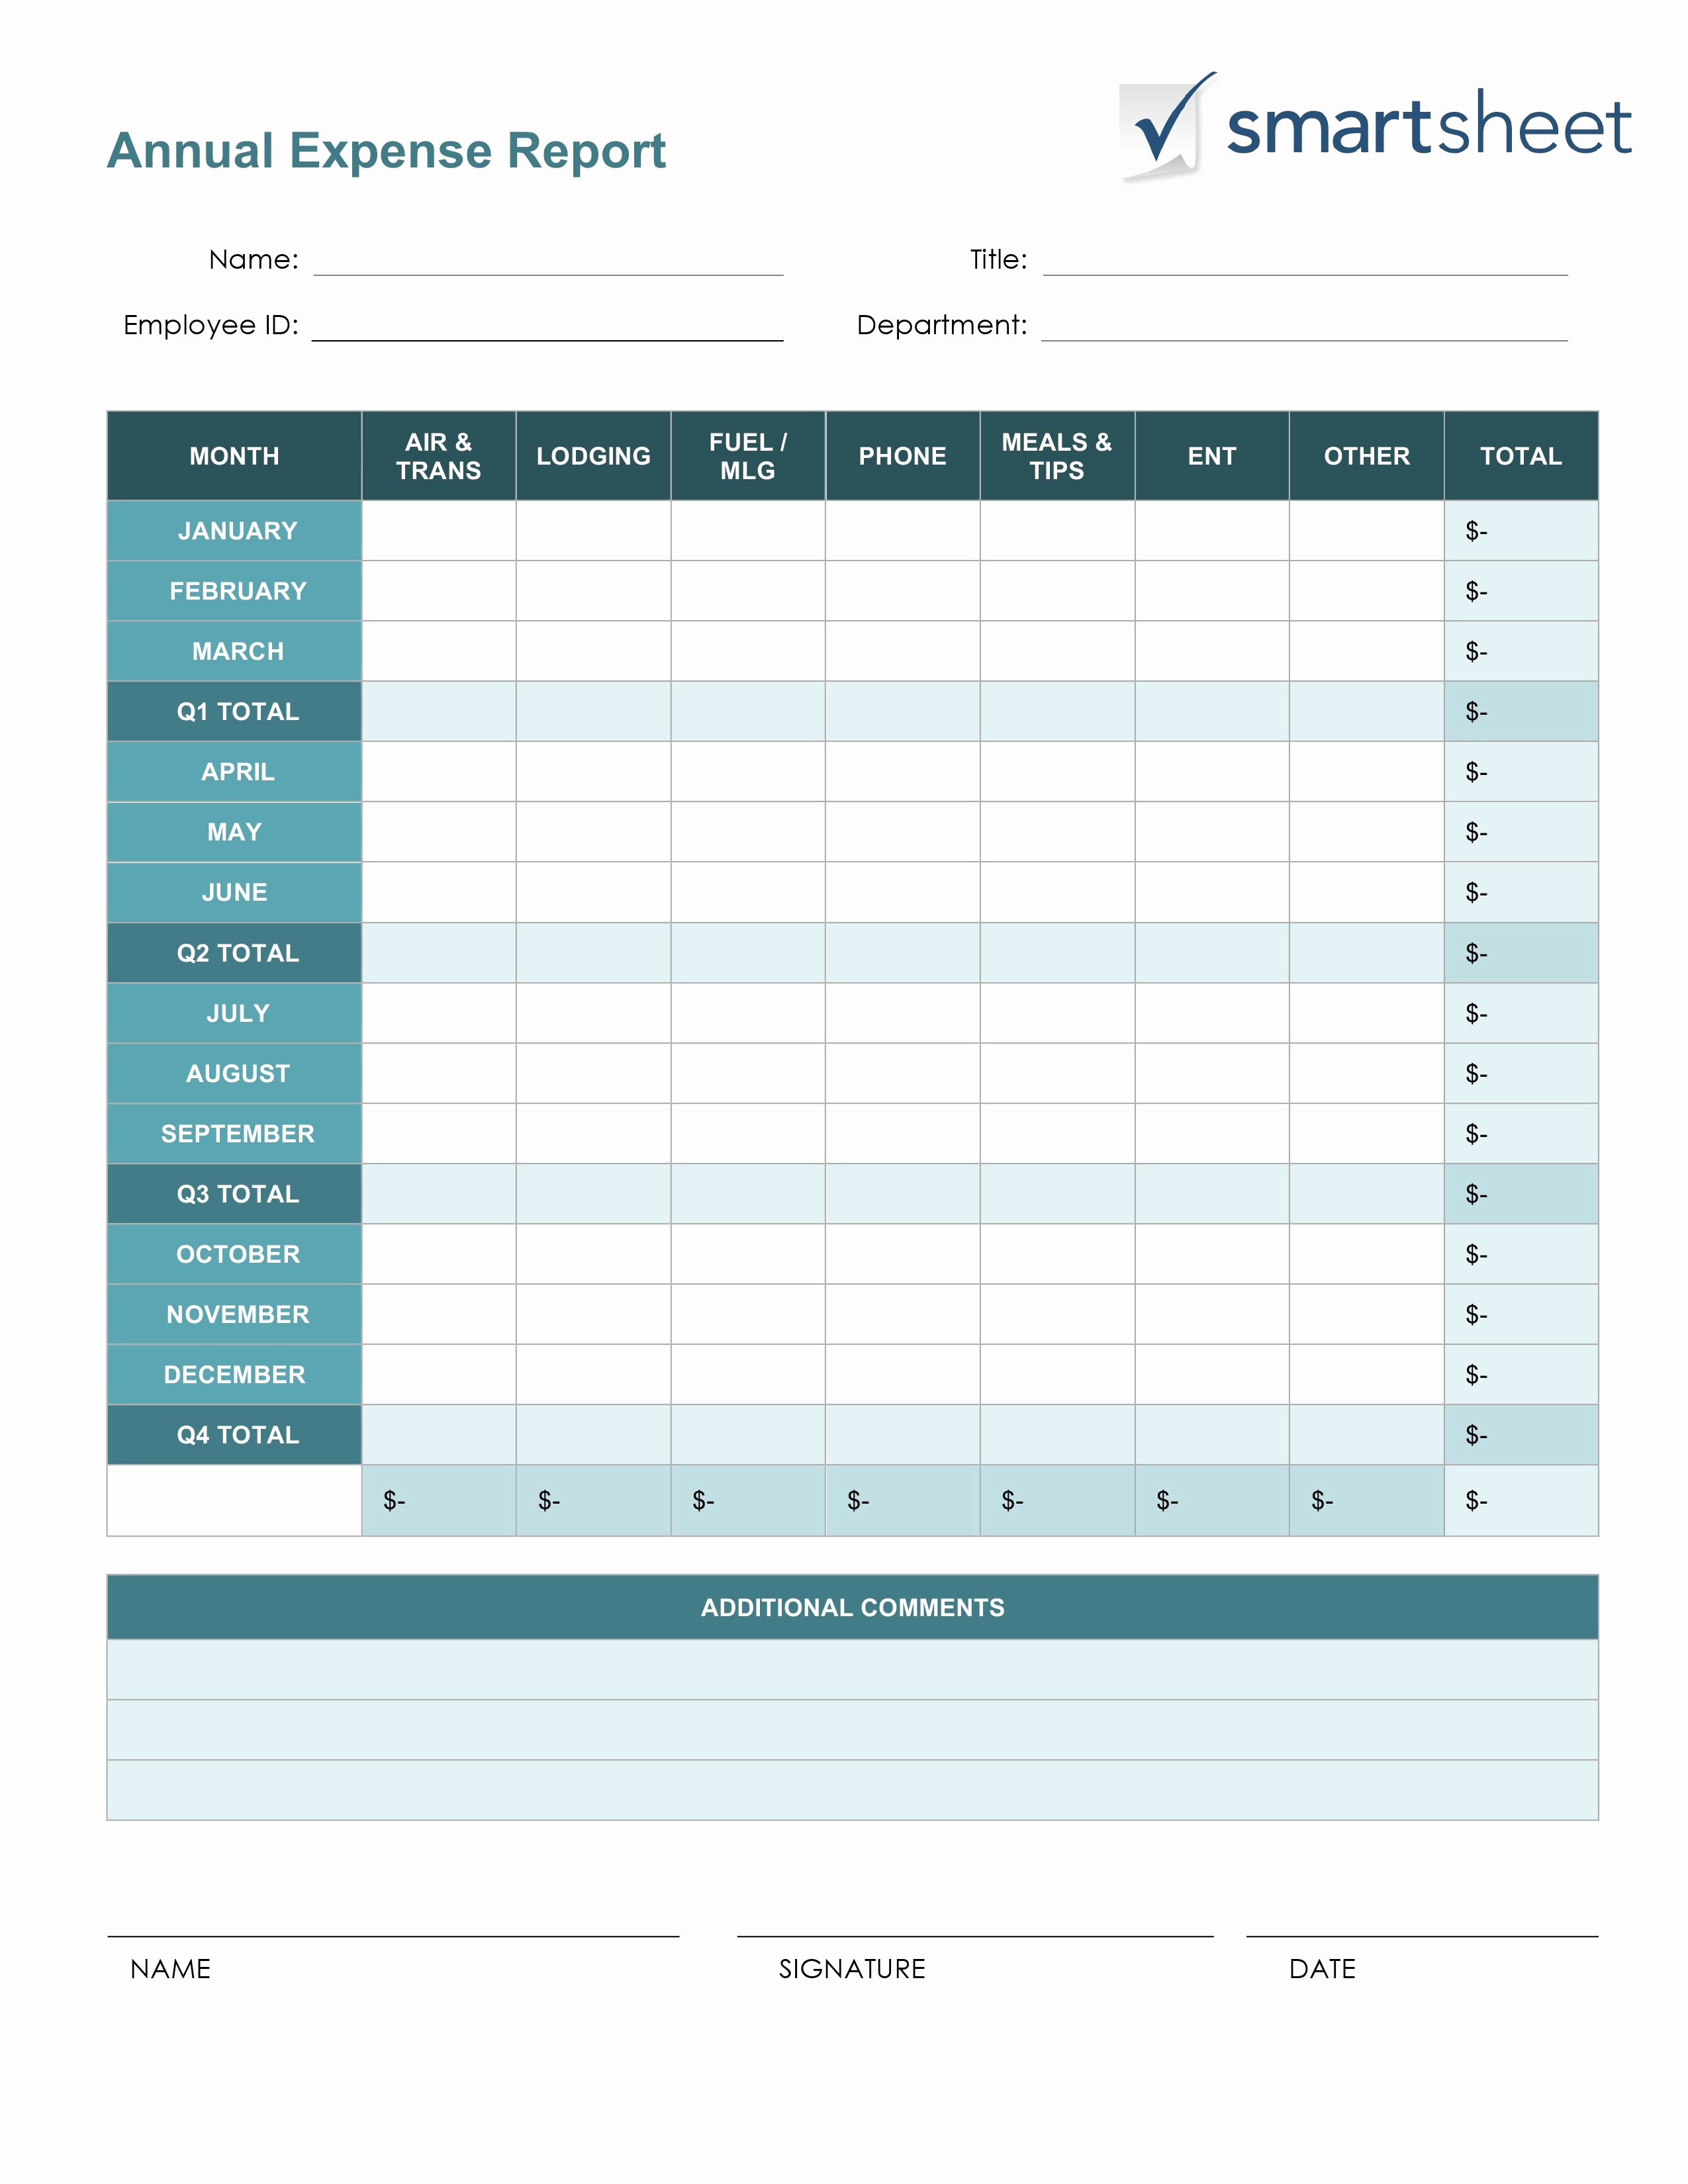 Business Expense Report Template New Free Expense Report Templates Smartsheet